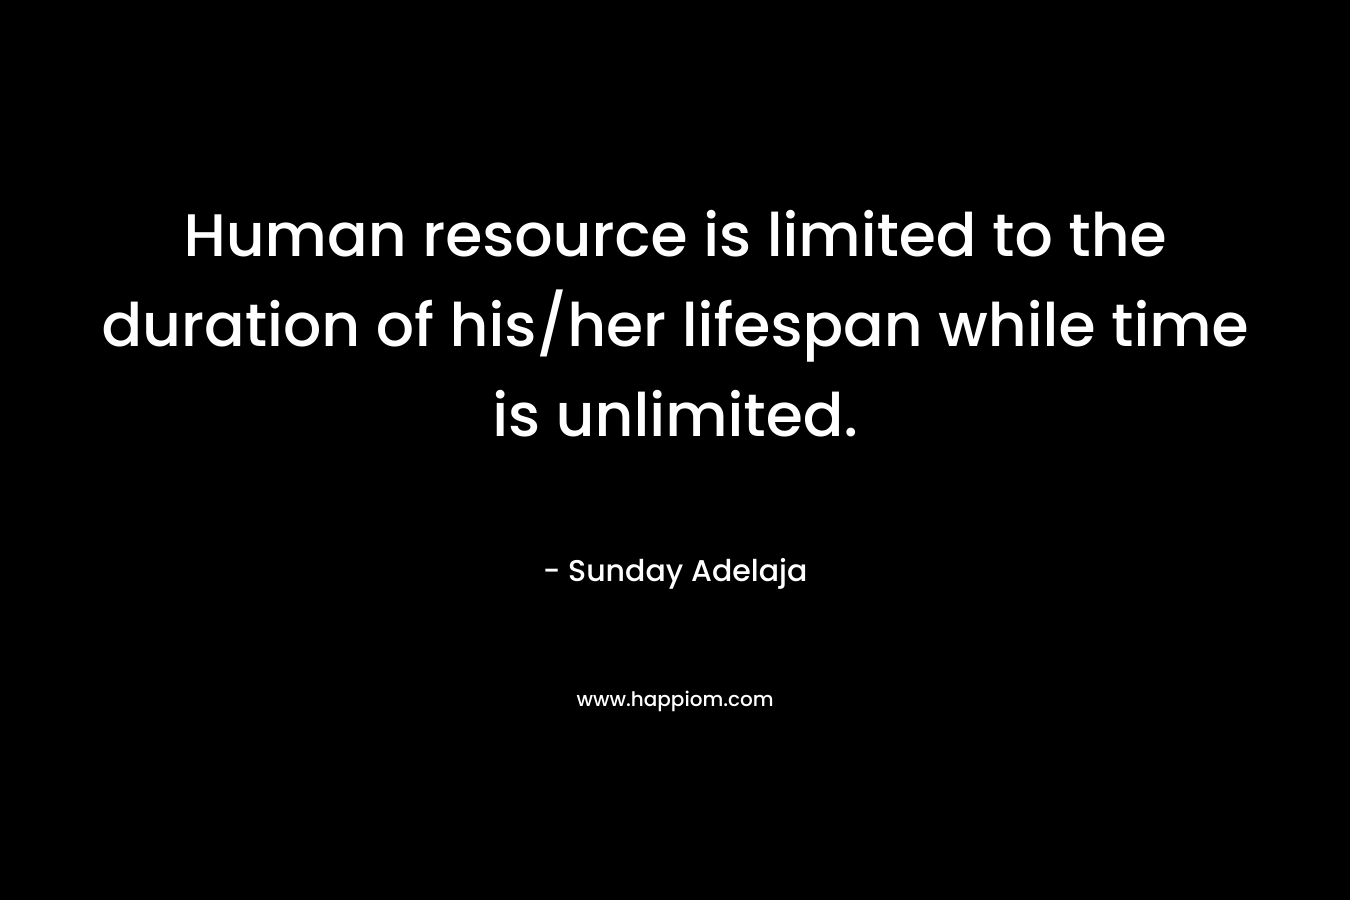 Human resource is limited to the duration of his/her lifespan while time is unlimited.